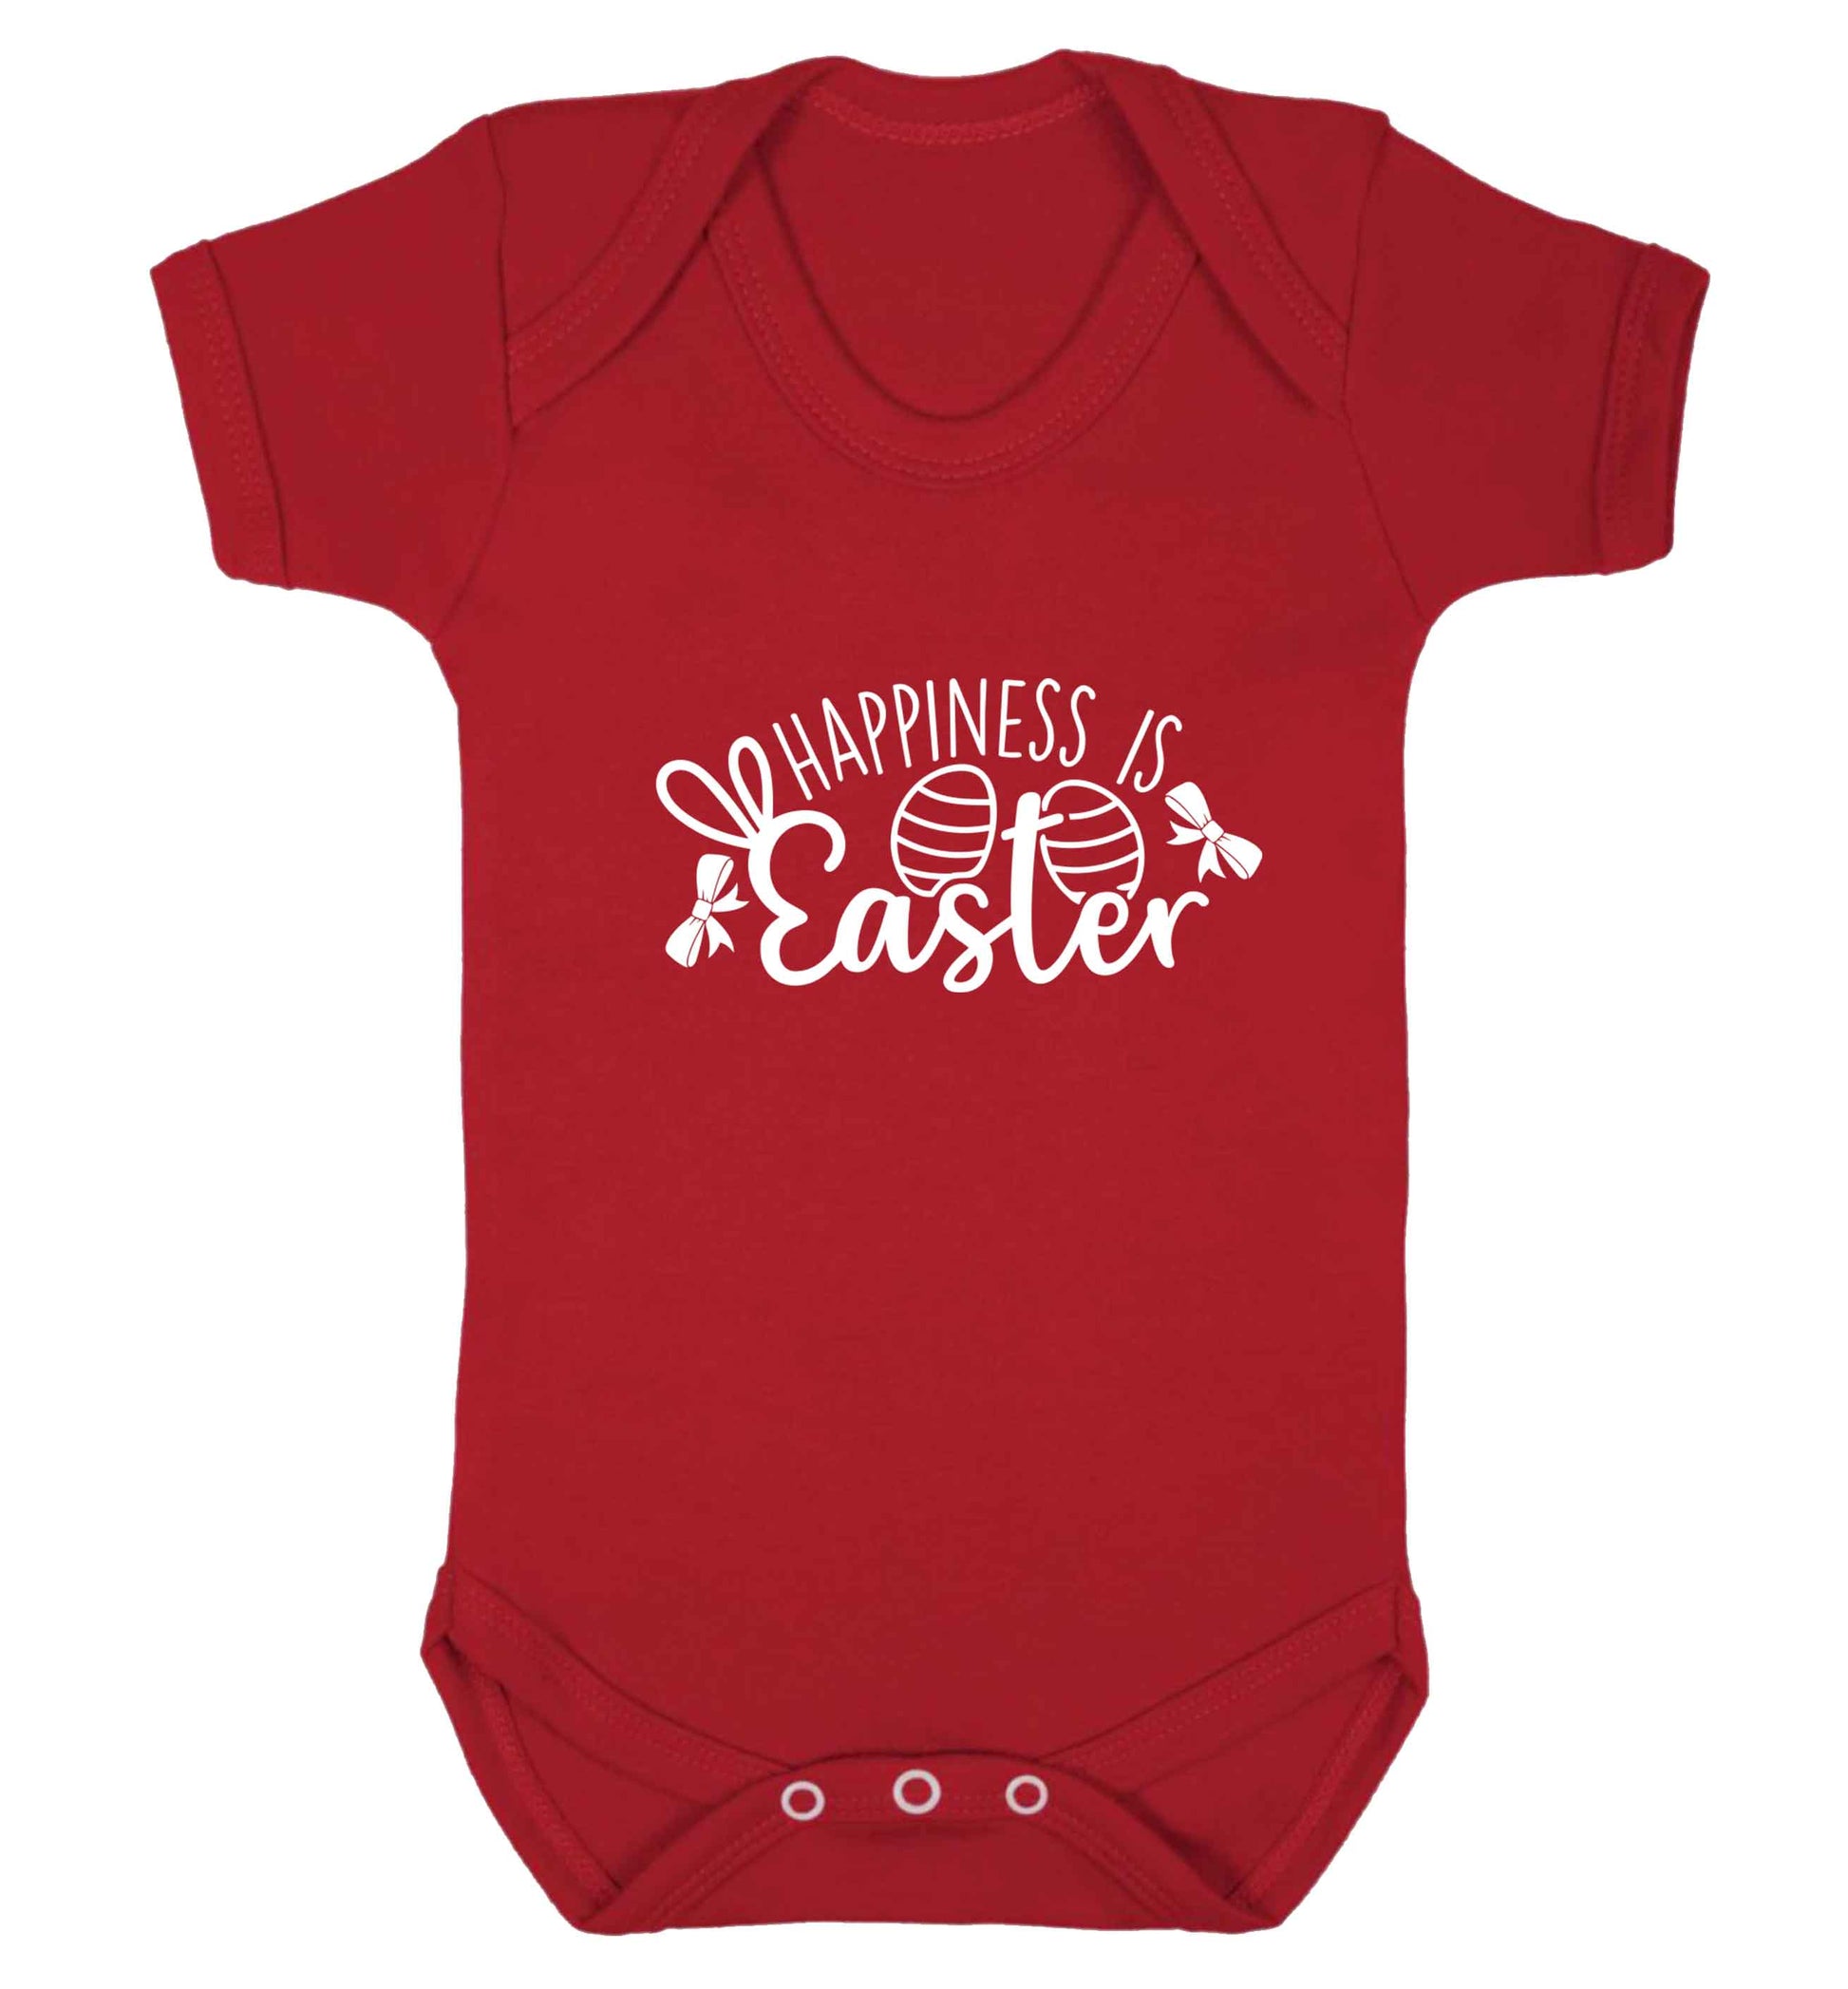 Happiness is easter baby vest red 18-24 months